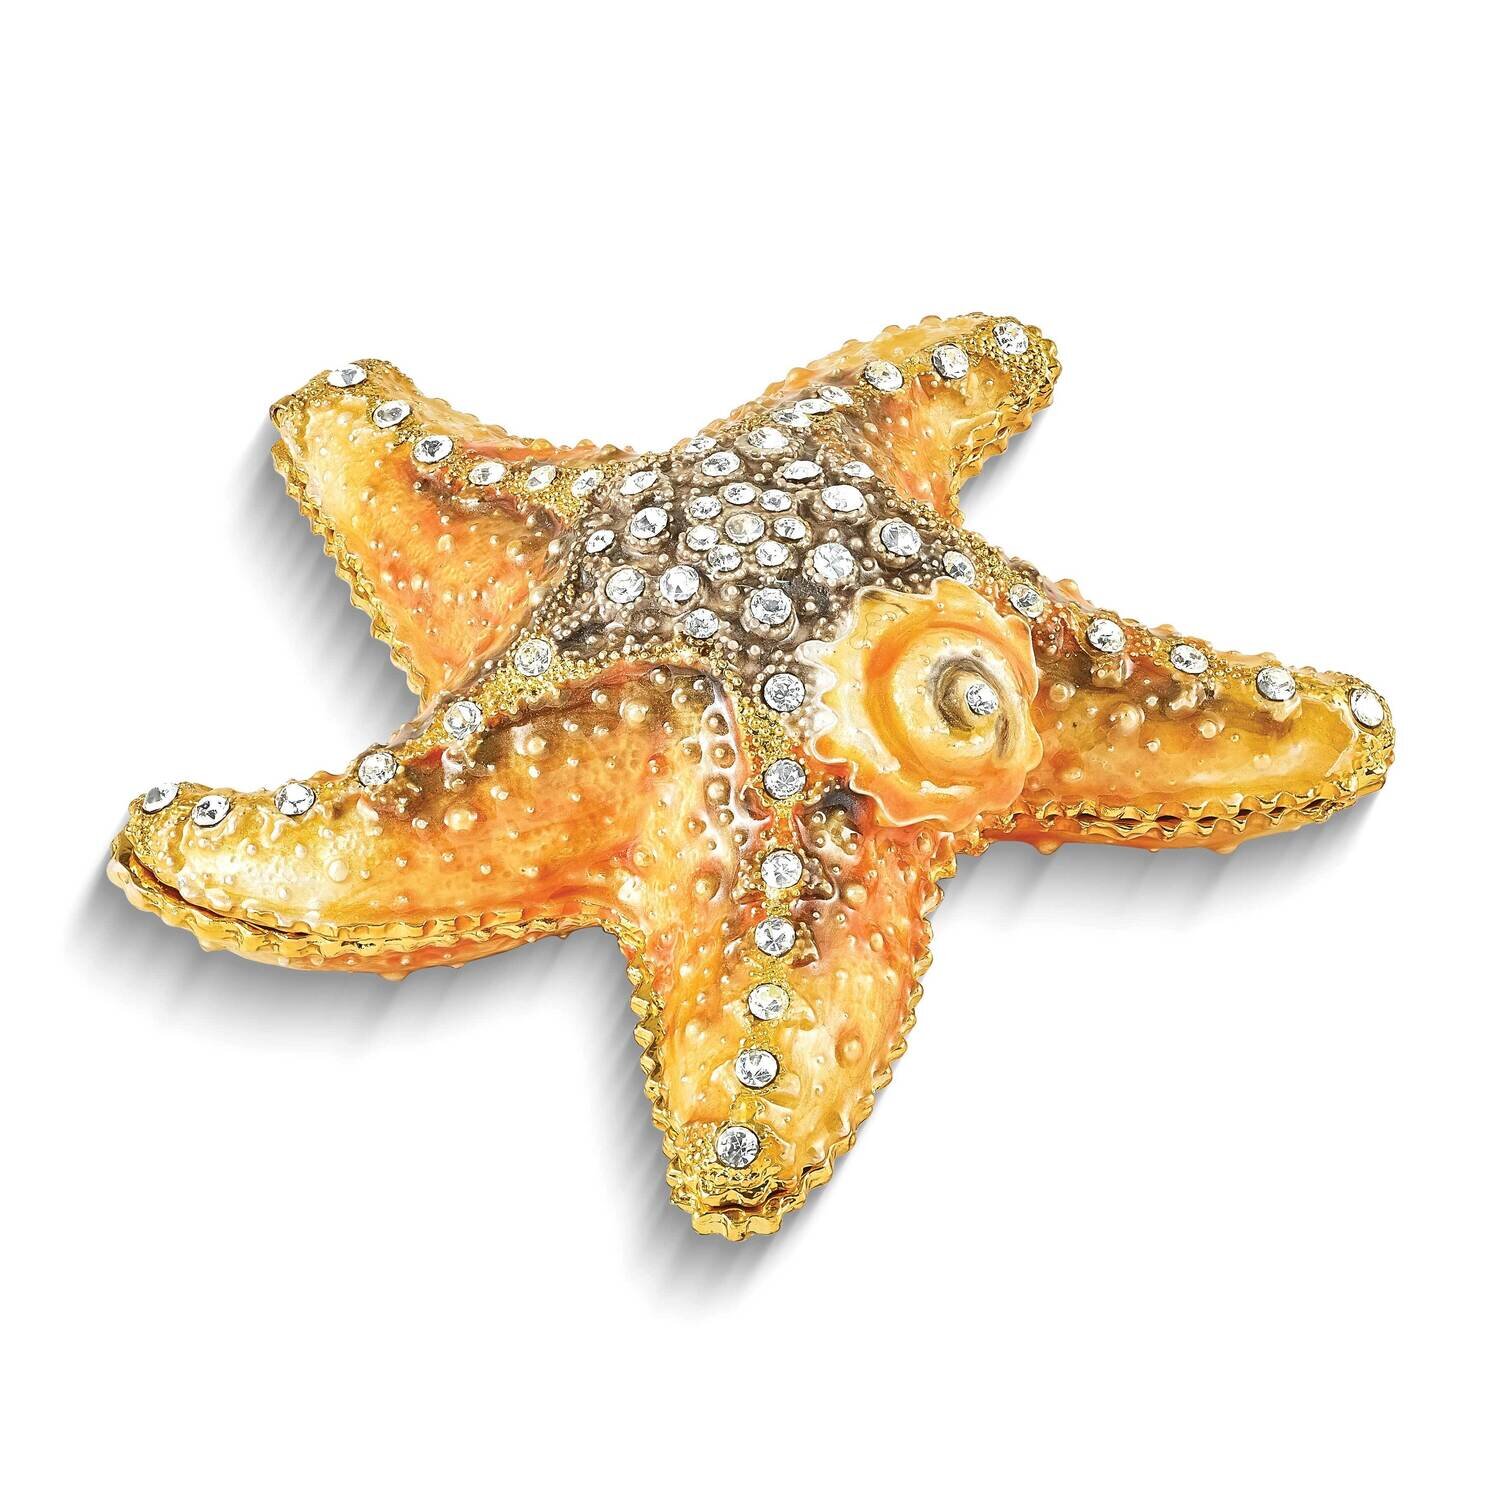 By Jere STANLEY Starfish Trinket Box with Matching 18 Inch Necklace Pewter Bejeweled Crystals Gold-tone Enameled BJ4160